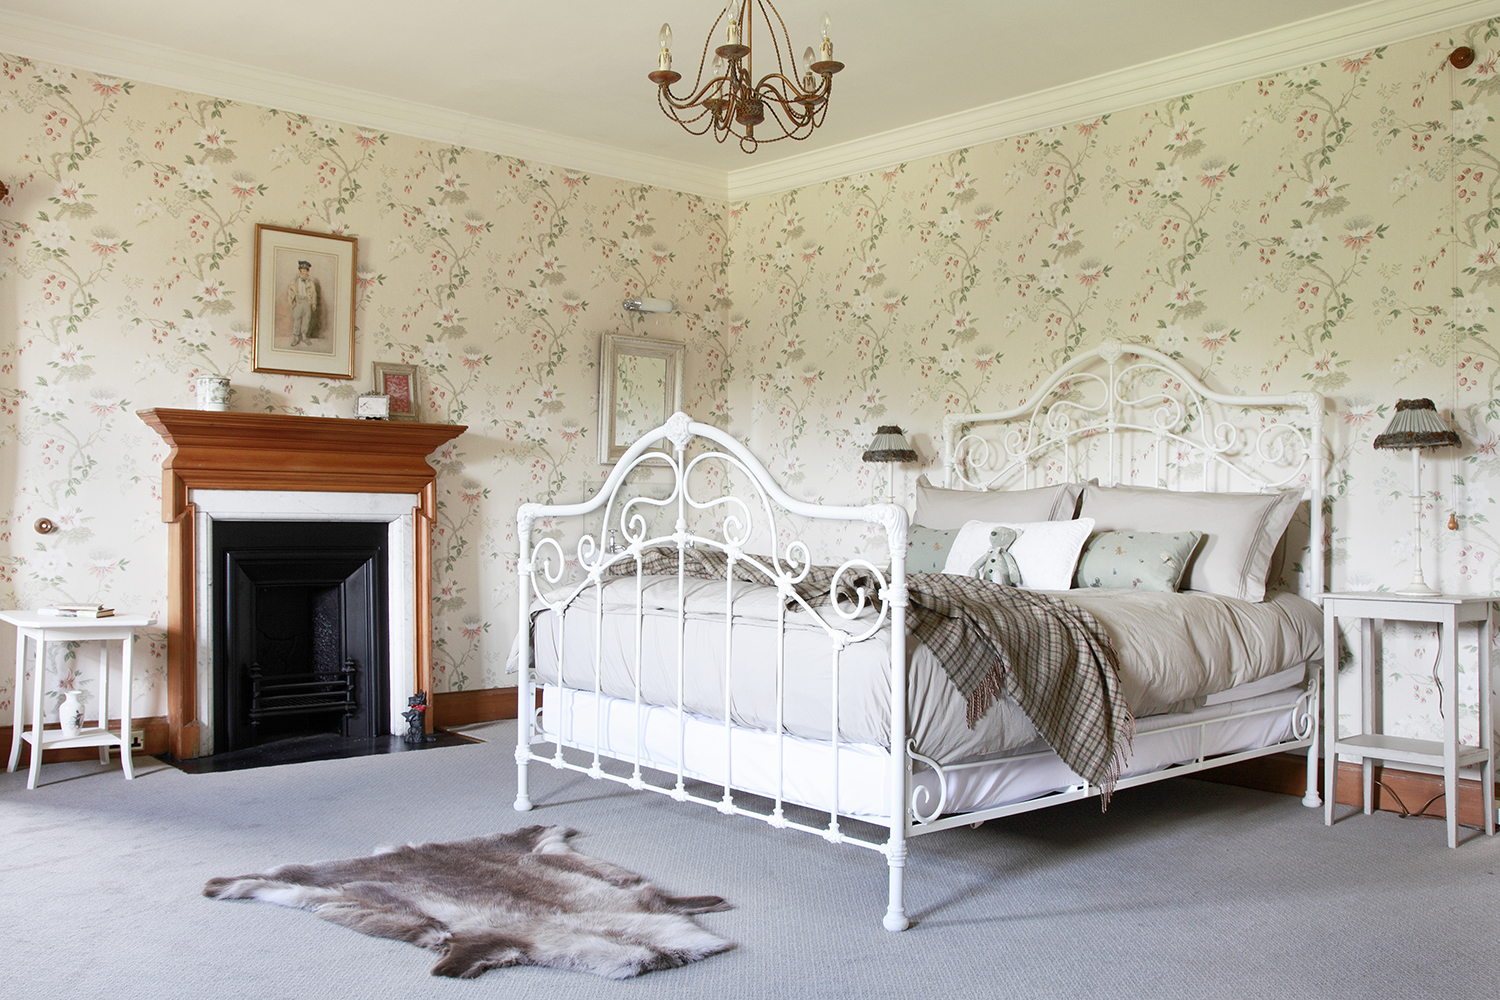 A vintage style cream ironwork bedstead with gentle swirls of passion flowers and buds decorating the wallpaper.